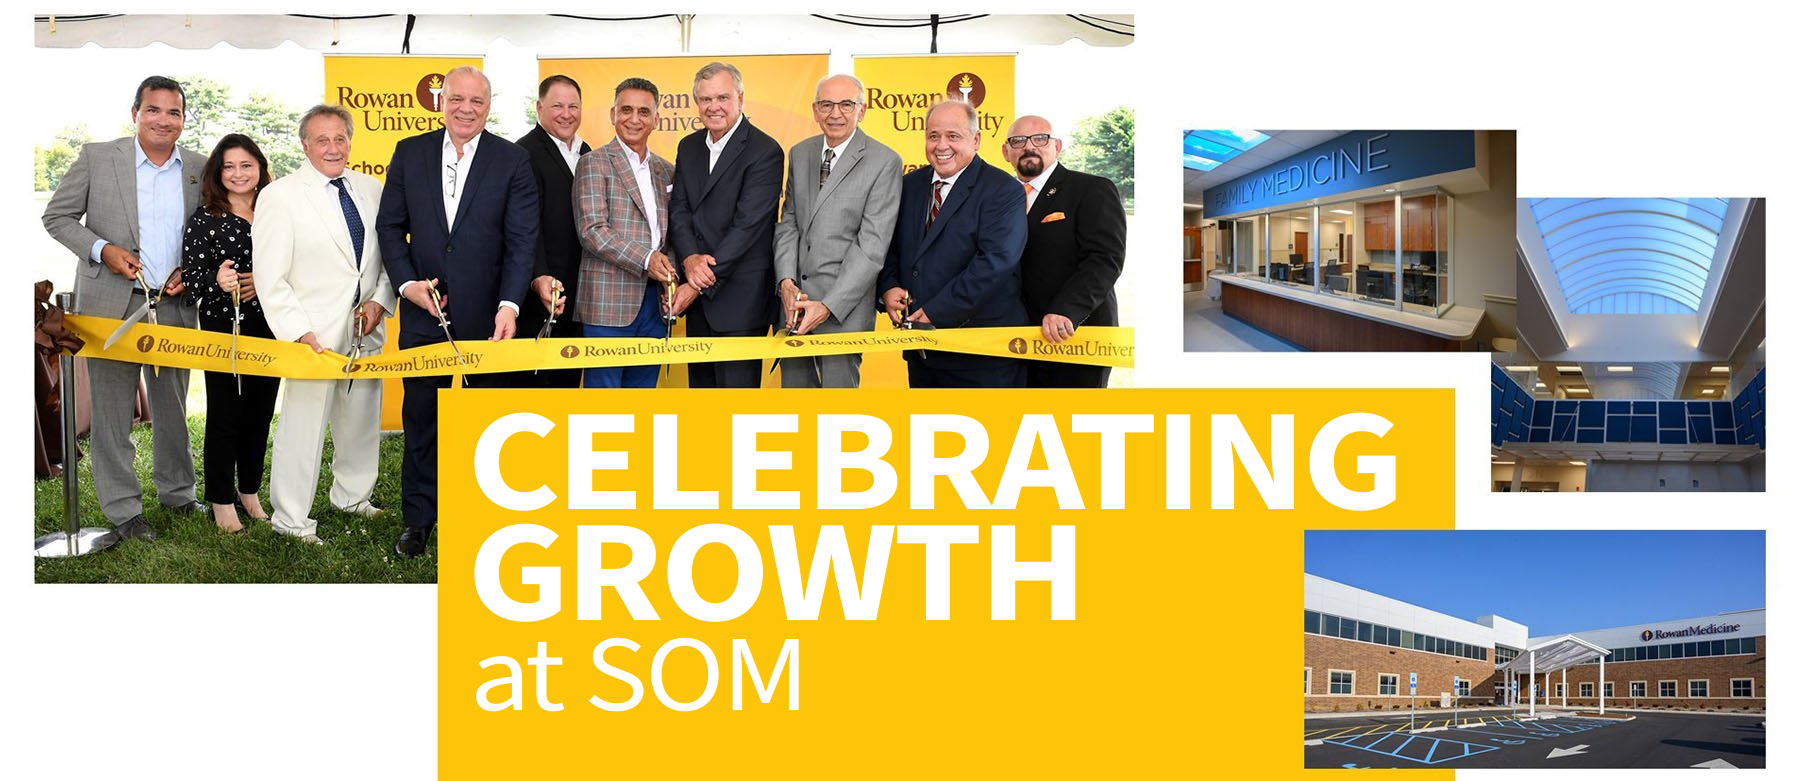 Celebrating Growth at RowanSOM - ribbon cutting at new Sewell Campus